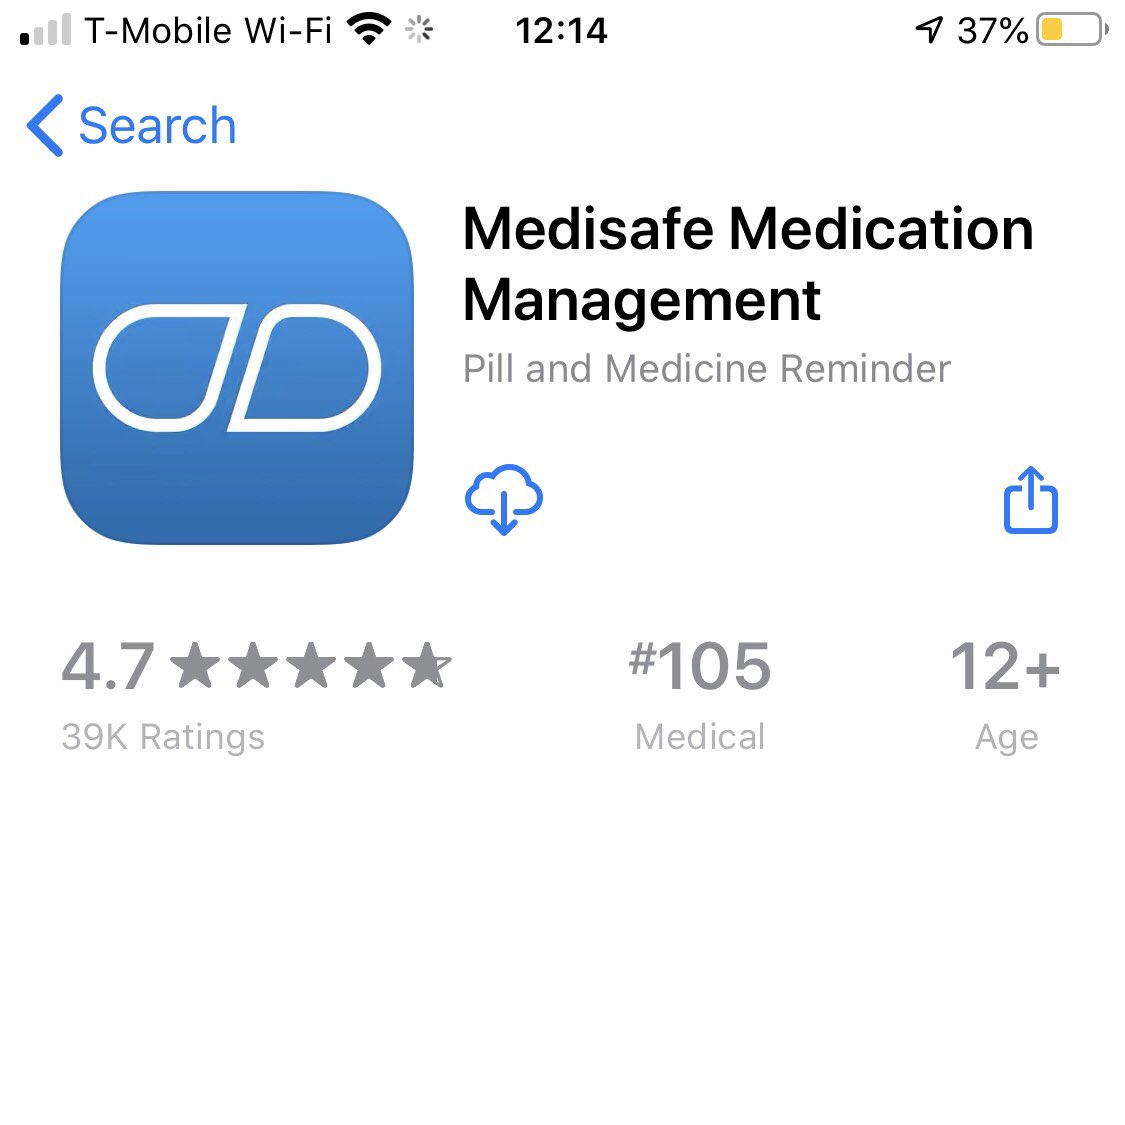 You can put it in your medications, dosage, shape, frequency and it’ll remind you to take it. It’s also very annoying and will notify you to take your meds like 3 times until you log that you’ve taken it